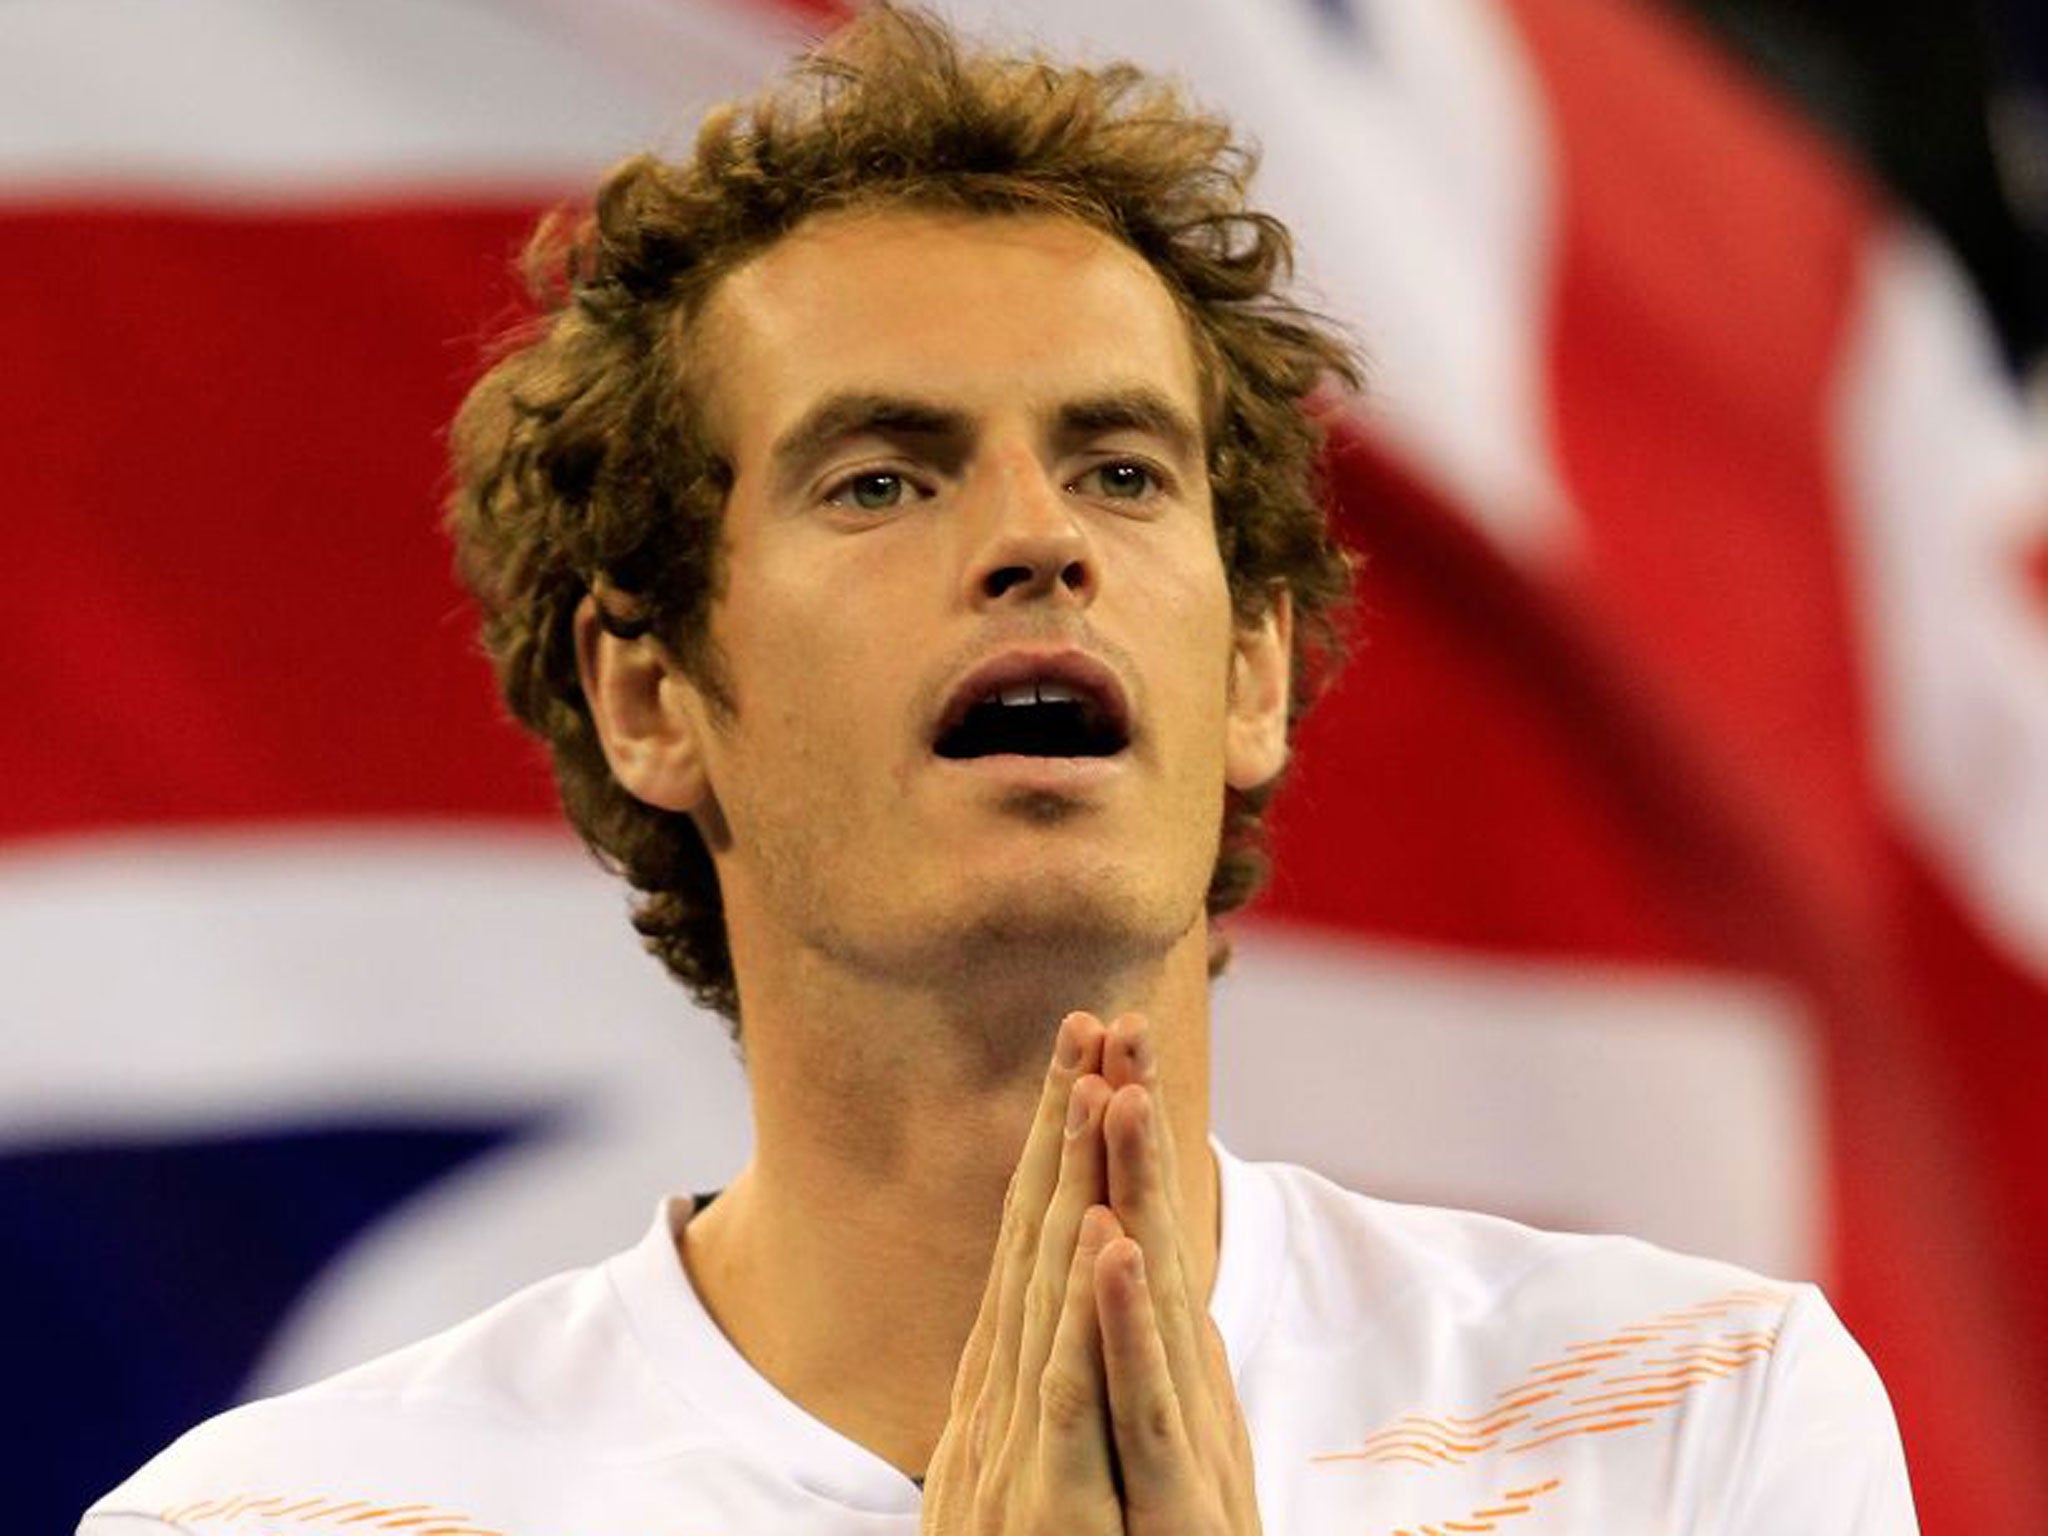 Andy Murray reacts to winning the US Open in New York in September